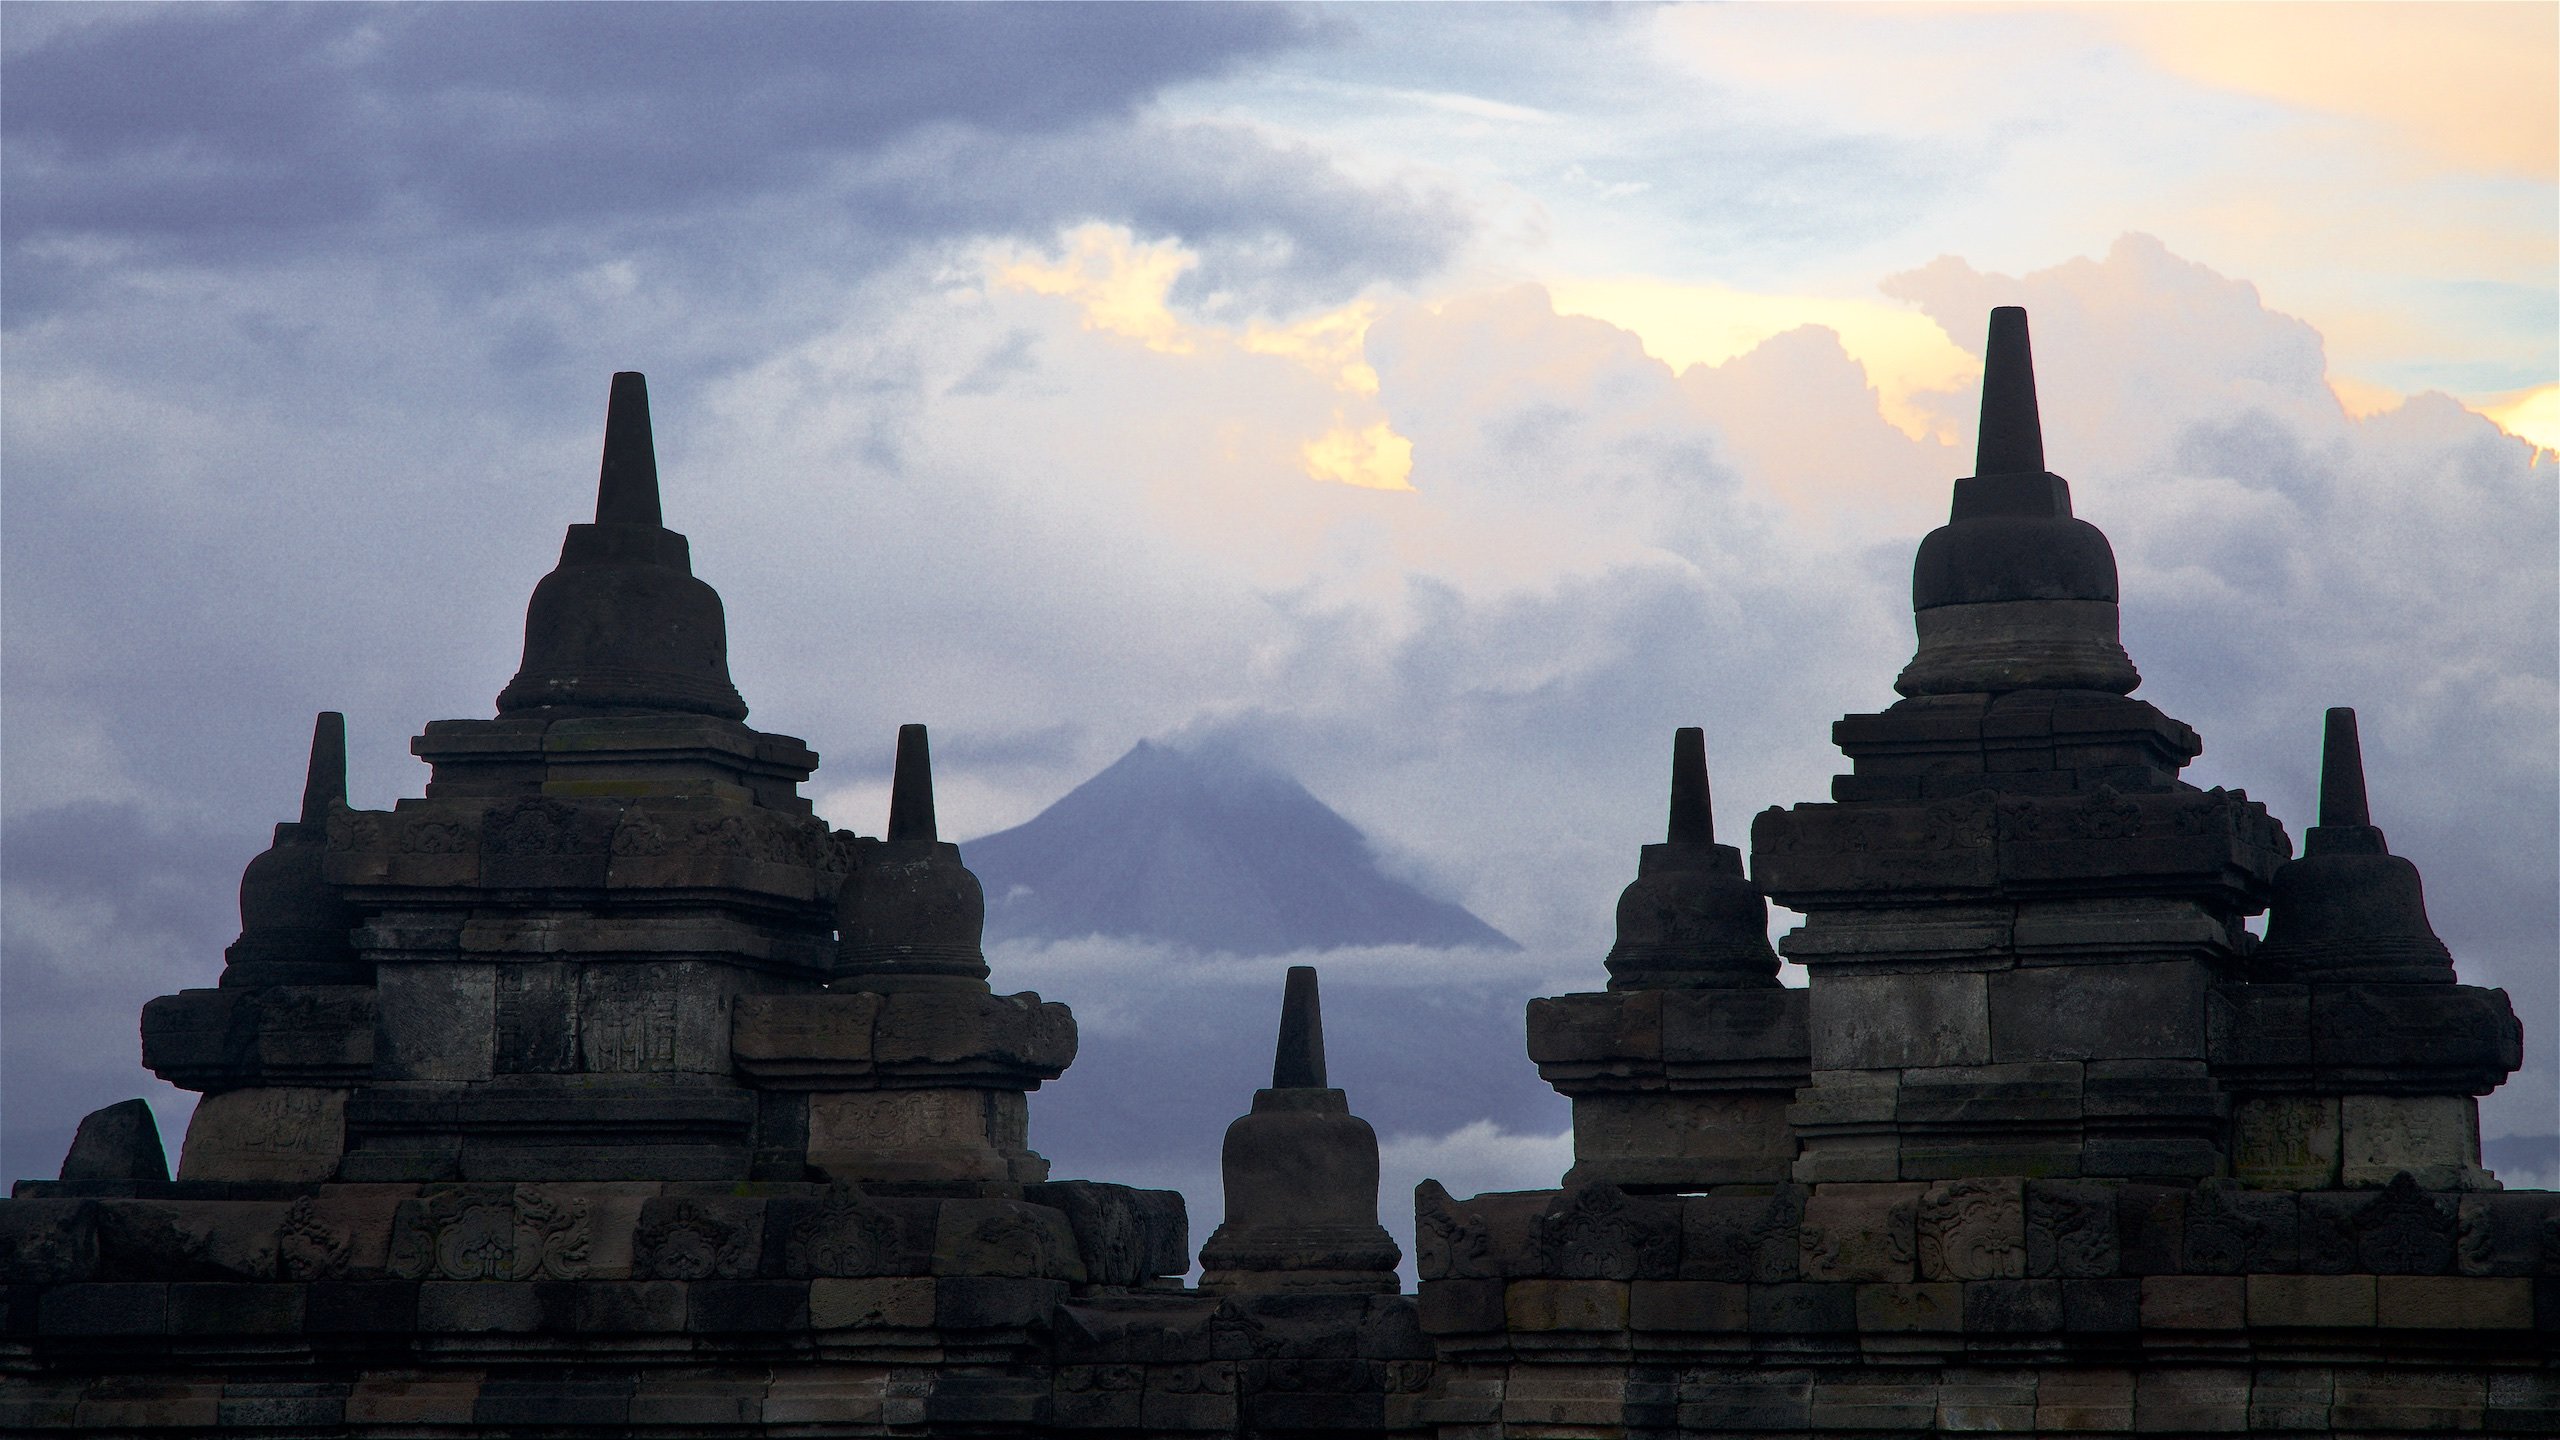 temple silhouette with mountain in background